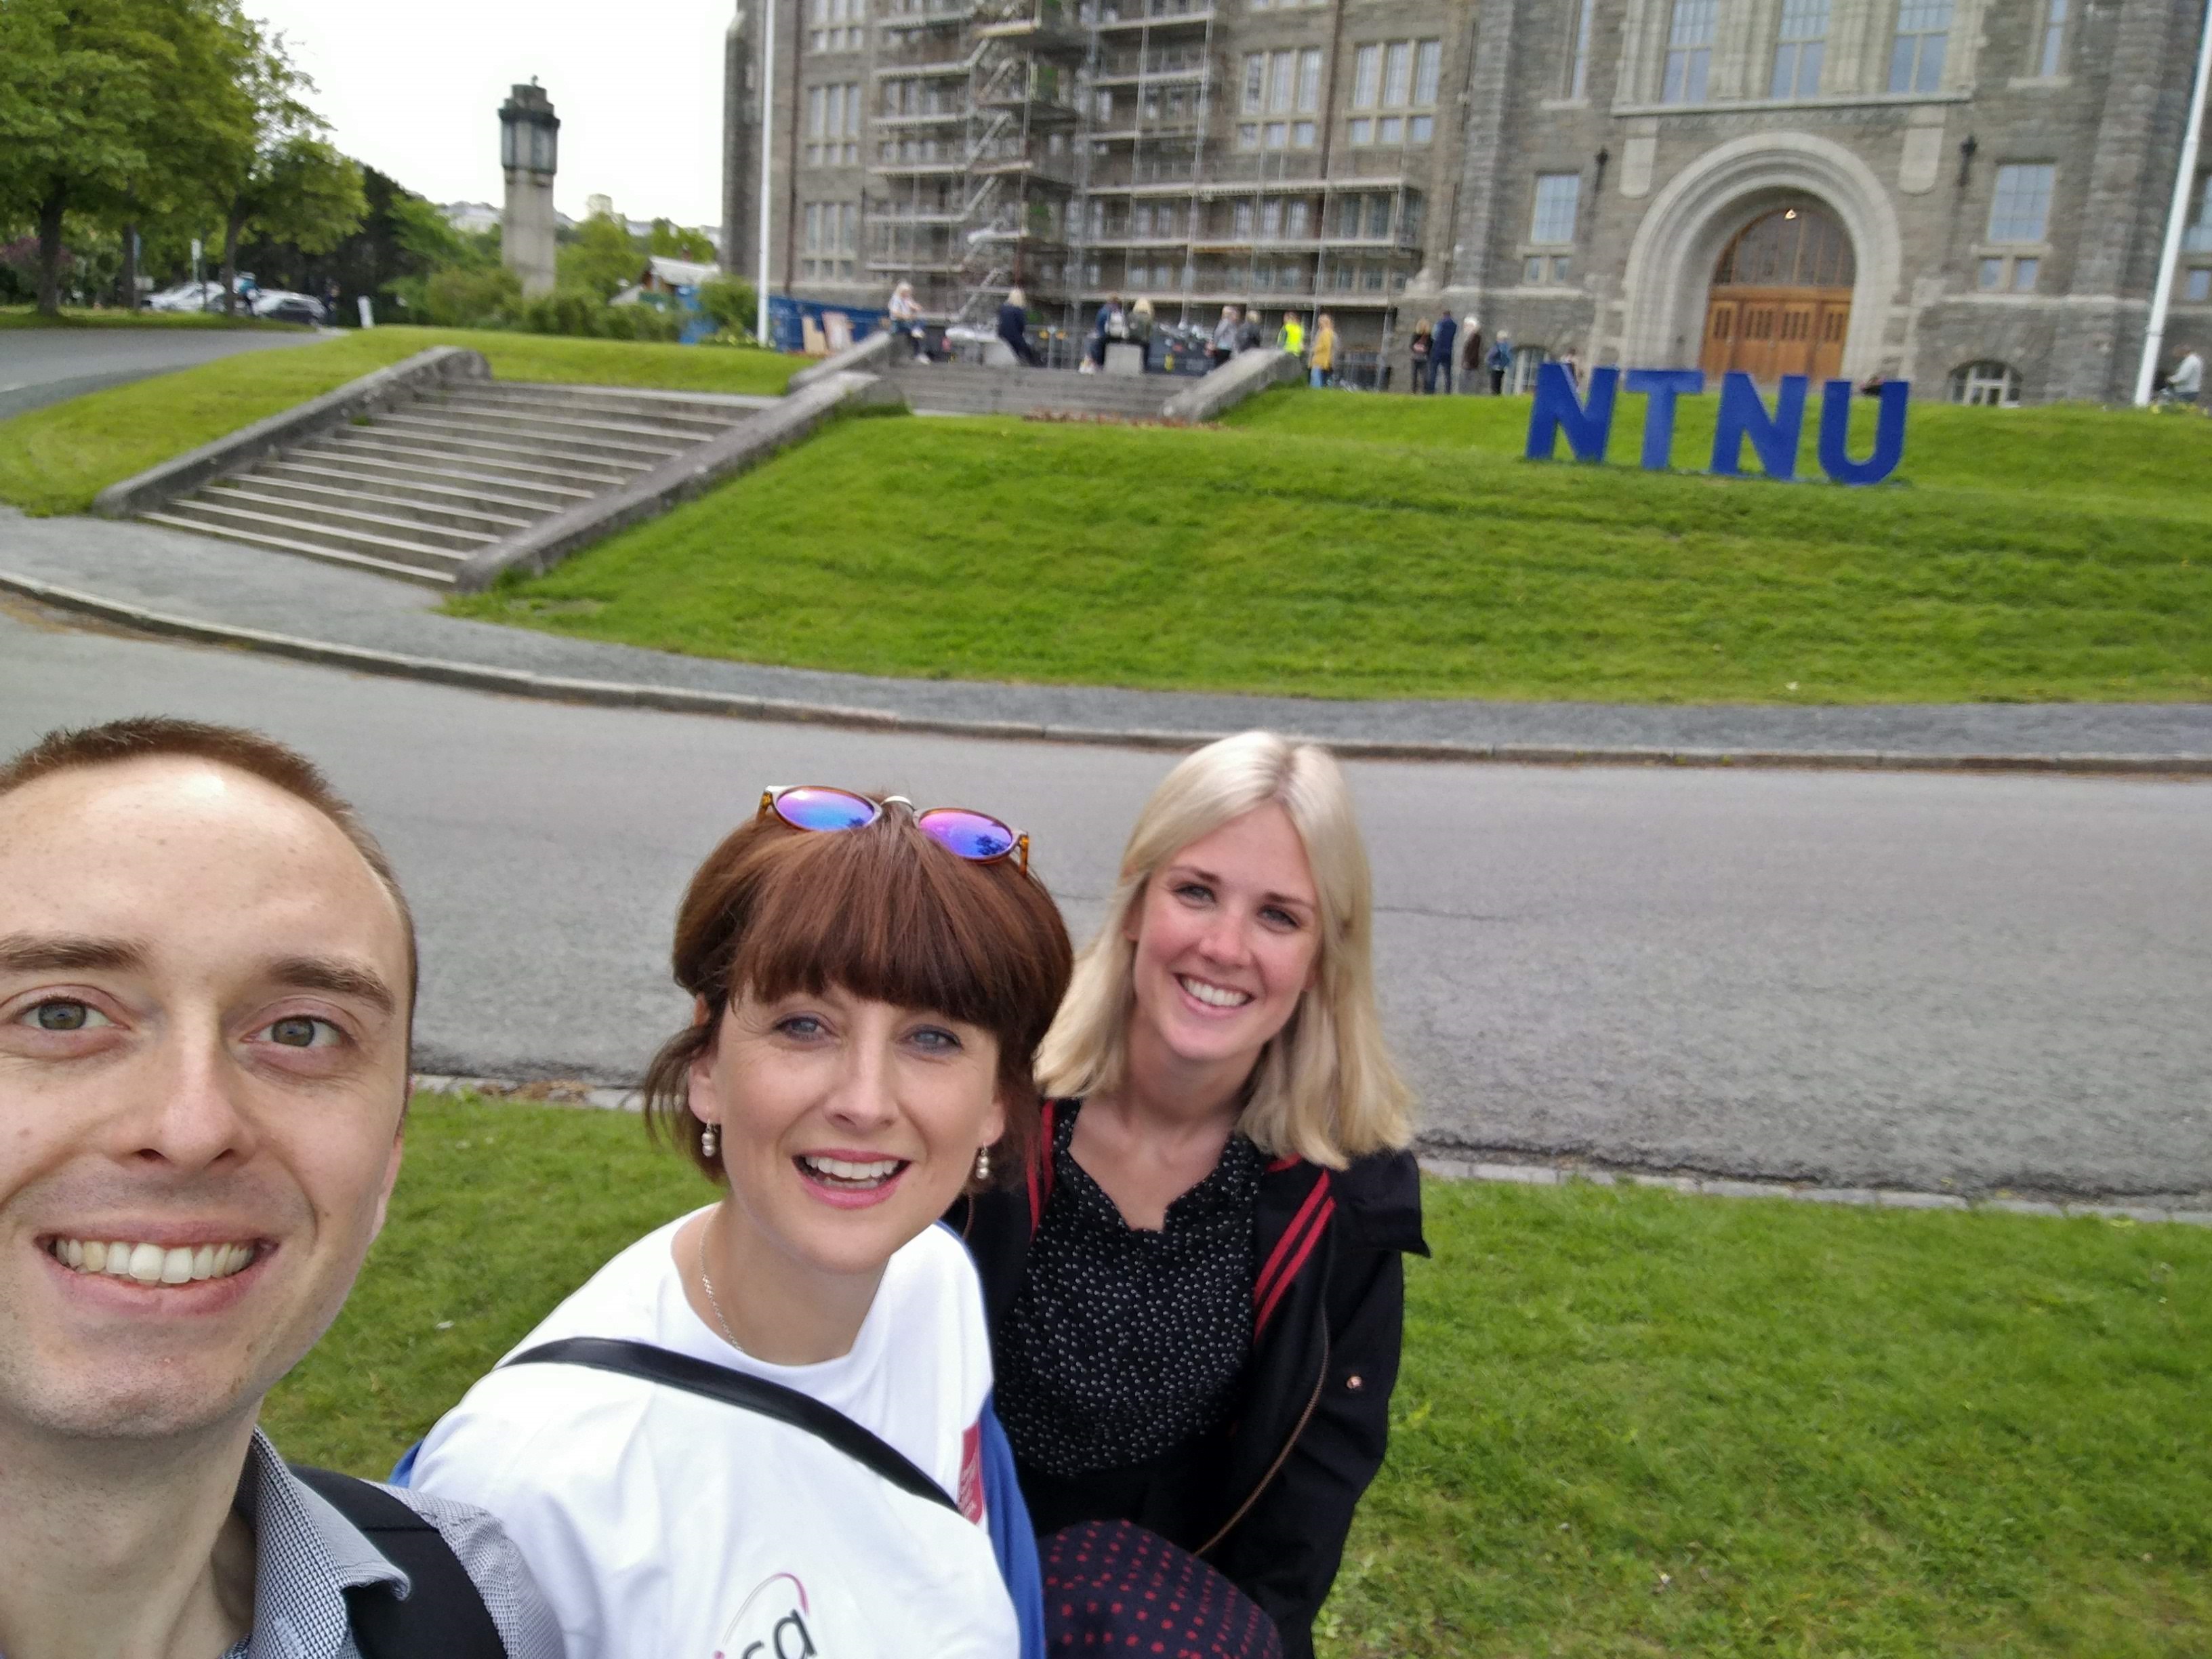 Colour photograph of bursary winners Sam Harrow, Elizabeth Griffiths and Samantha Chester in front of an NTNU building 